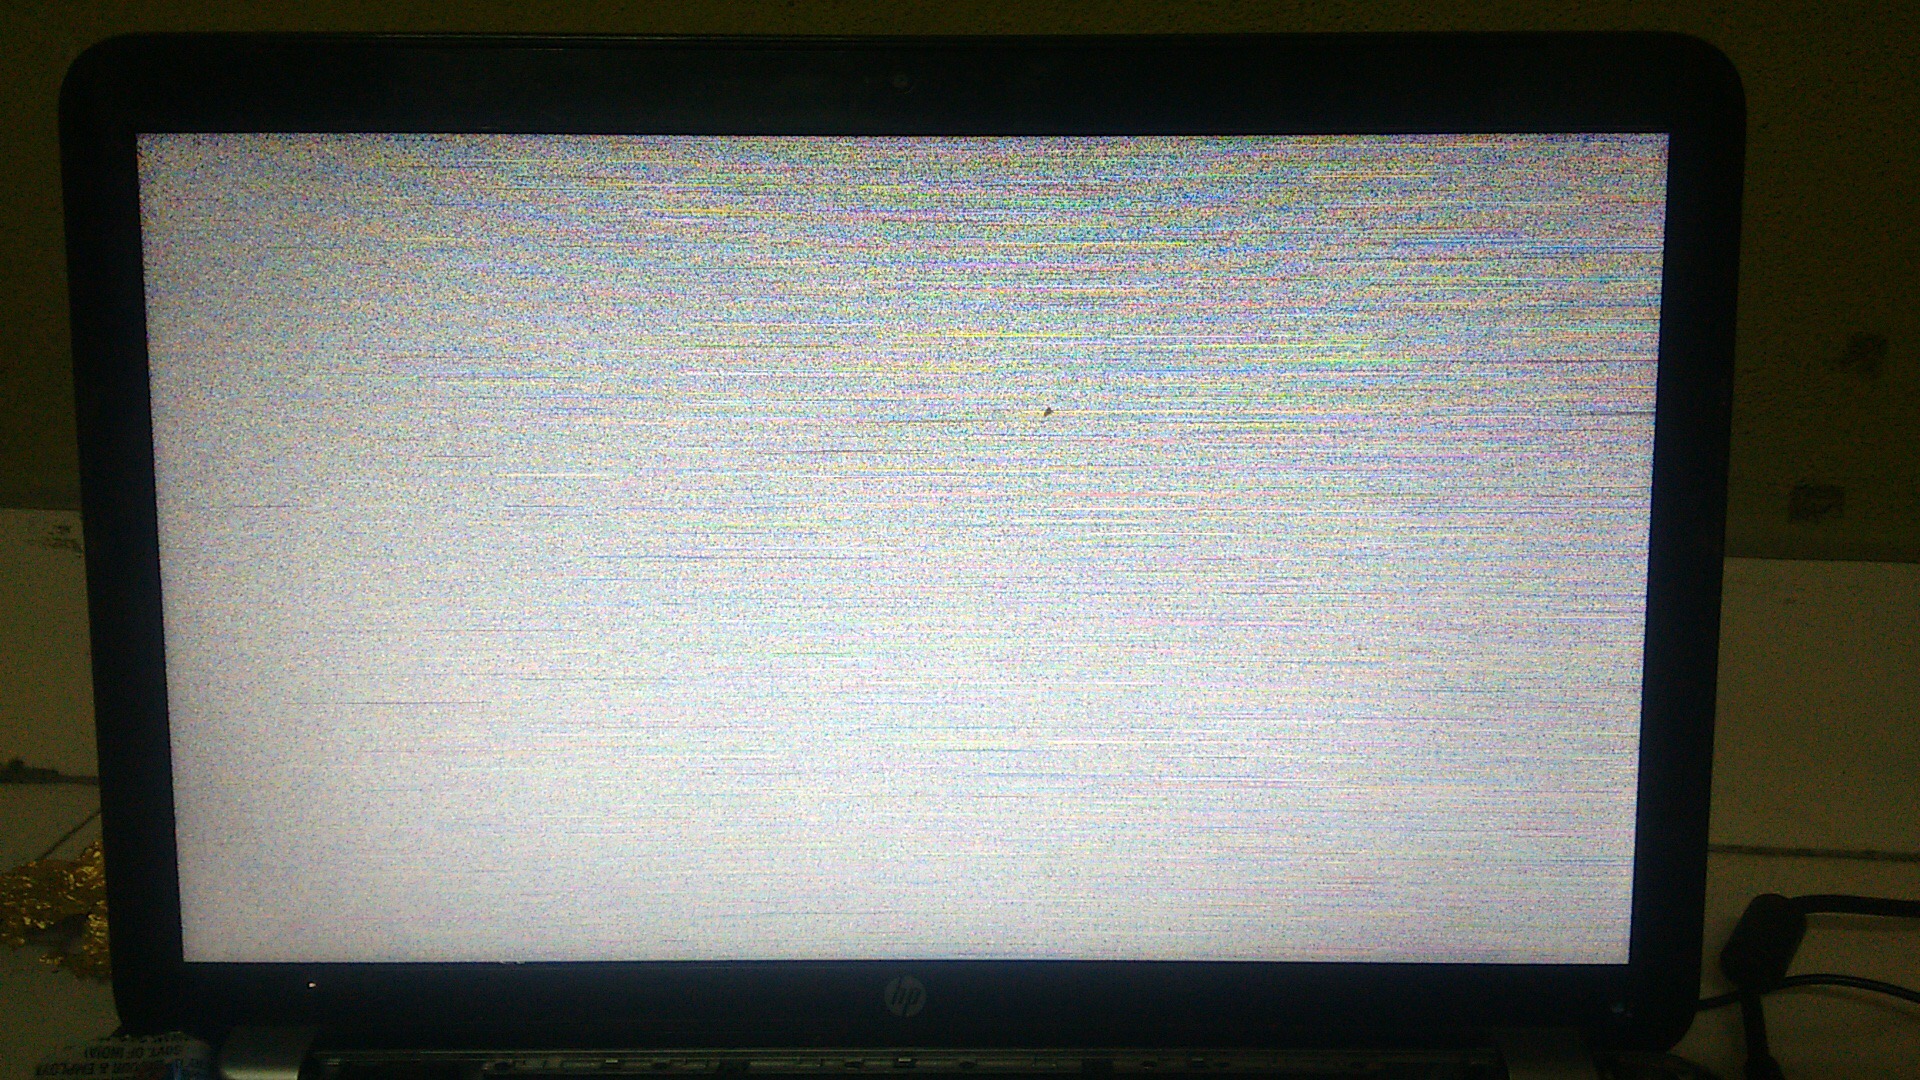 My laptop's screen glitches and freezes randomly - HP Support Community -  8053206